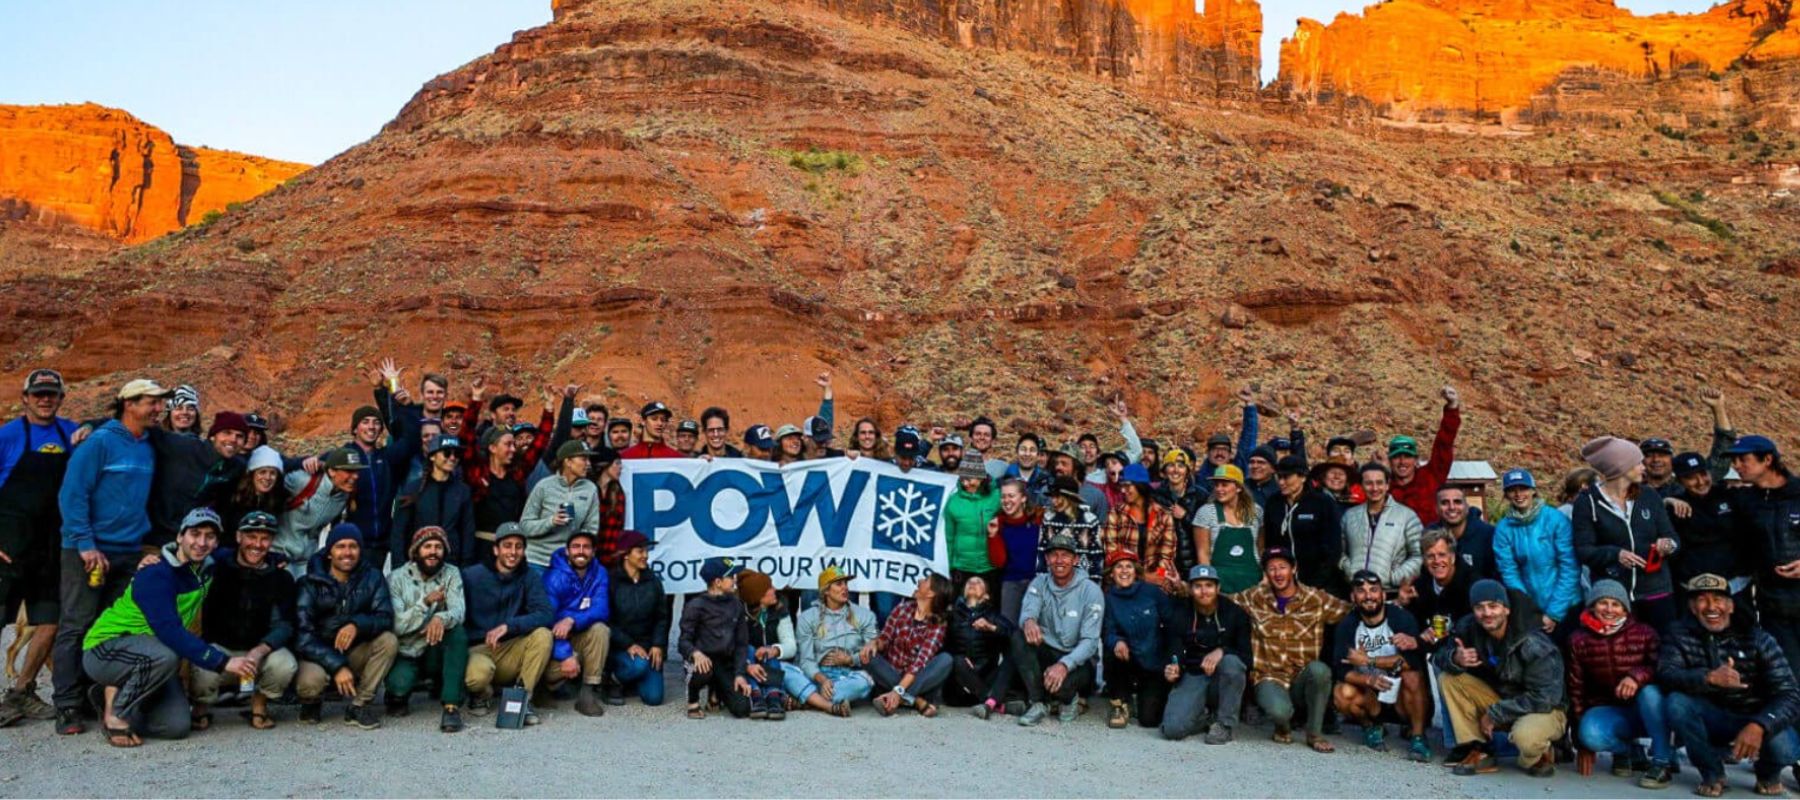 Members of Protect Our Winters in Moab posing